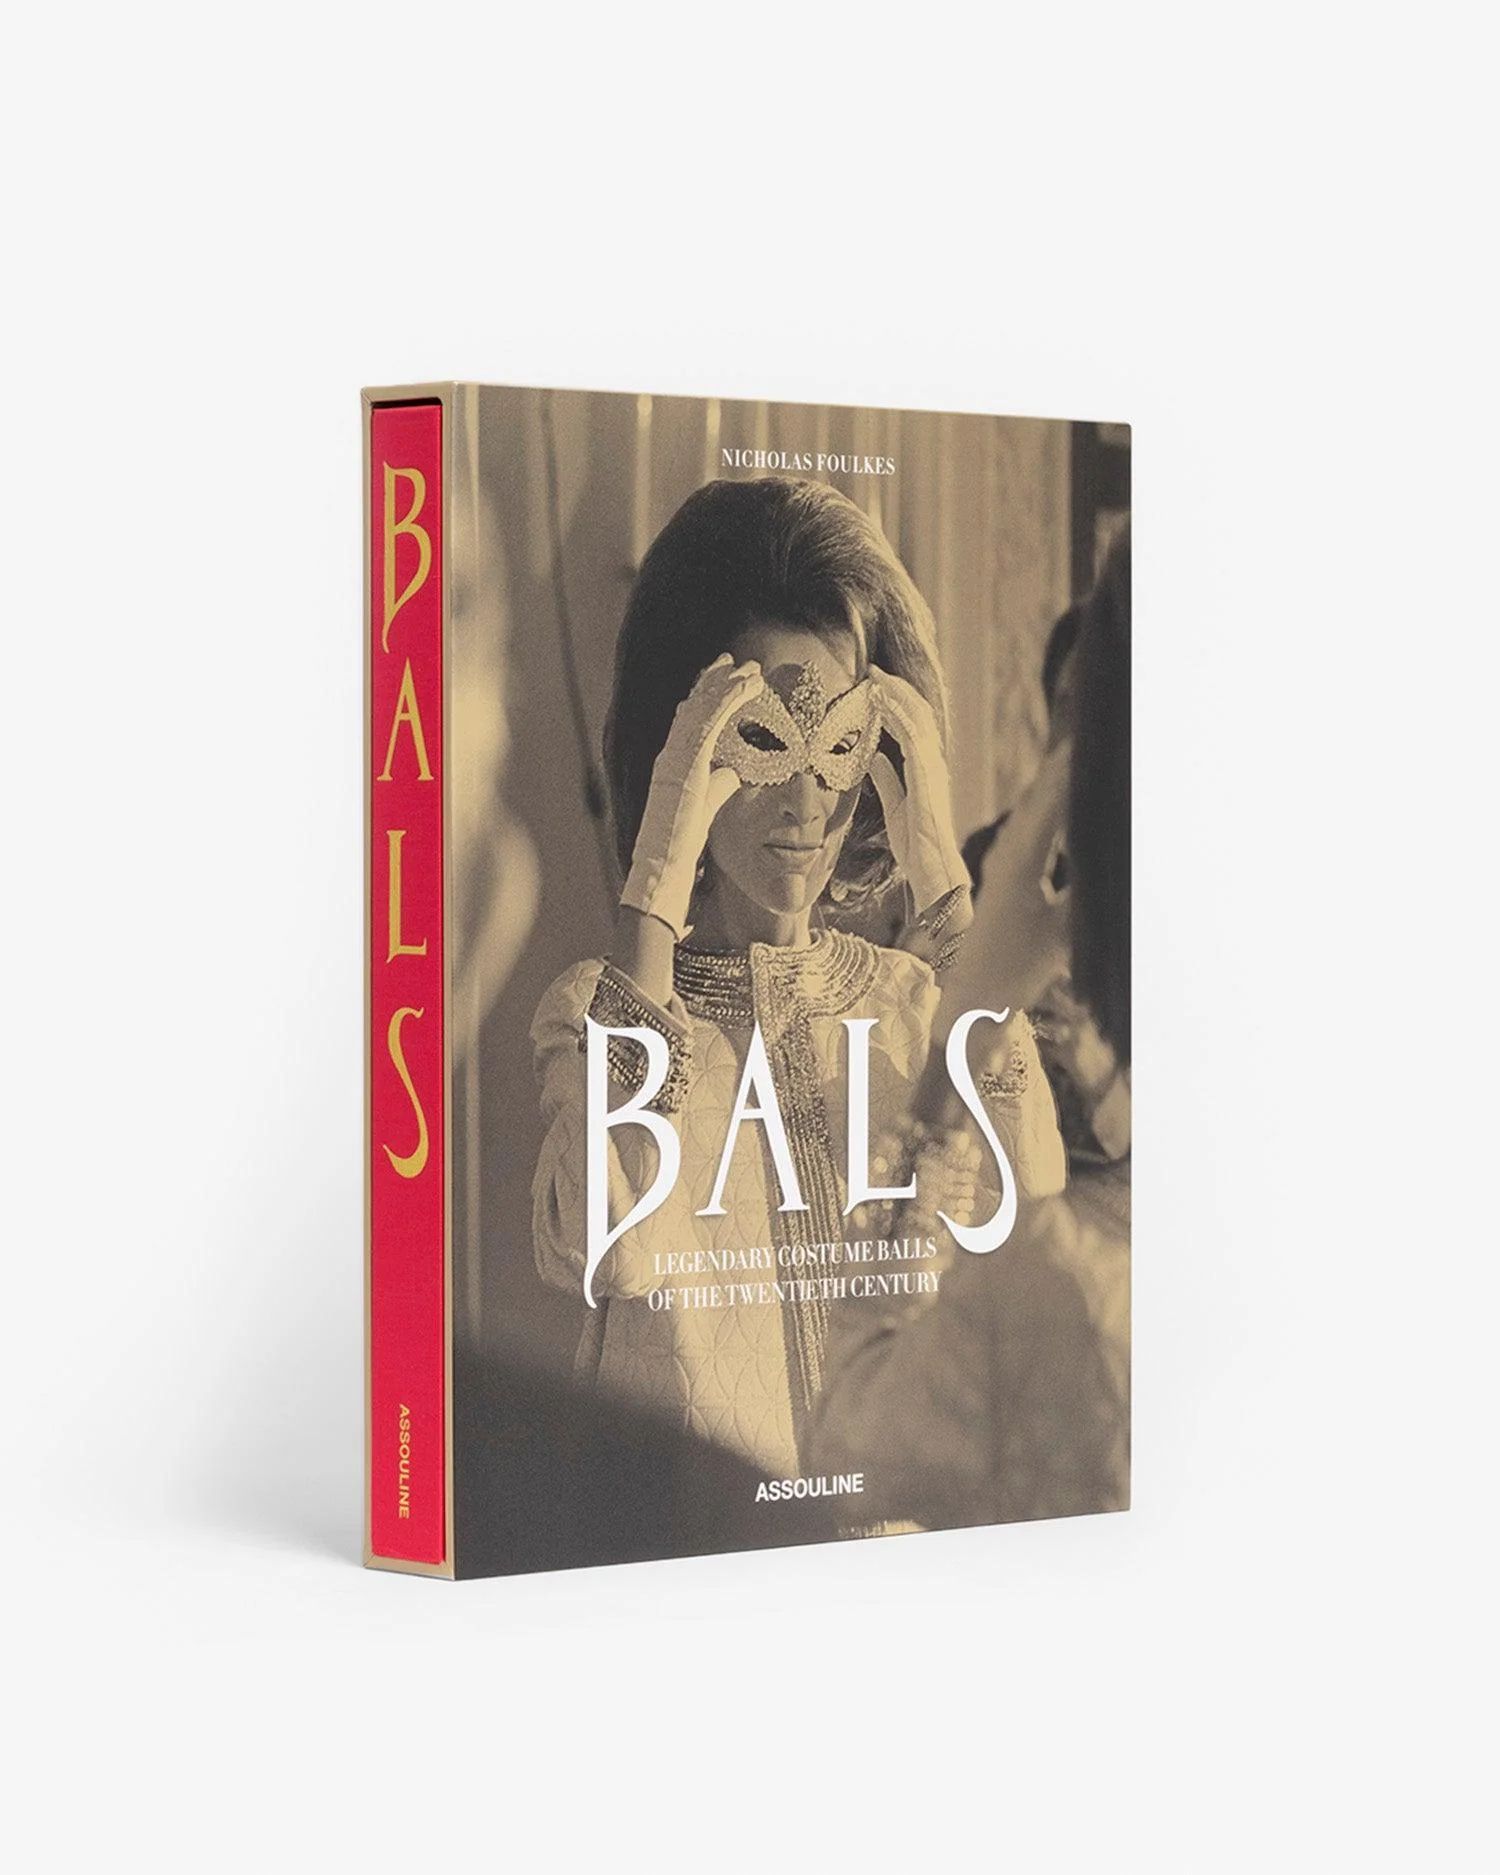 BALS by Nicholas Foulkes - Coffee Table Book | ASSOULINE | Assouline